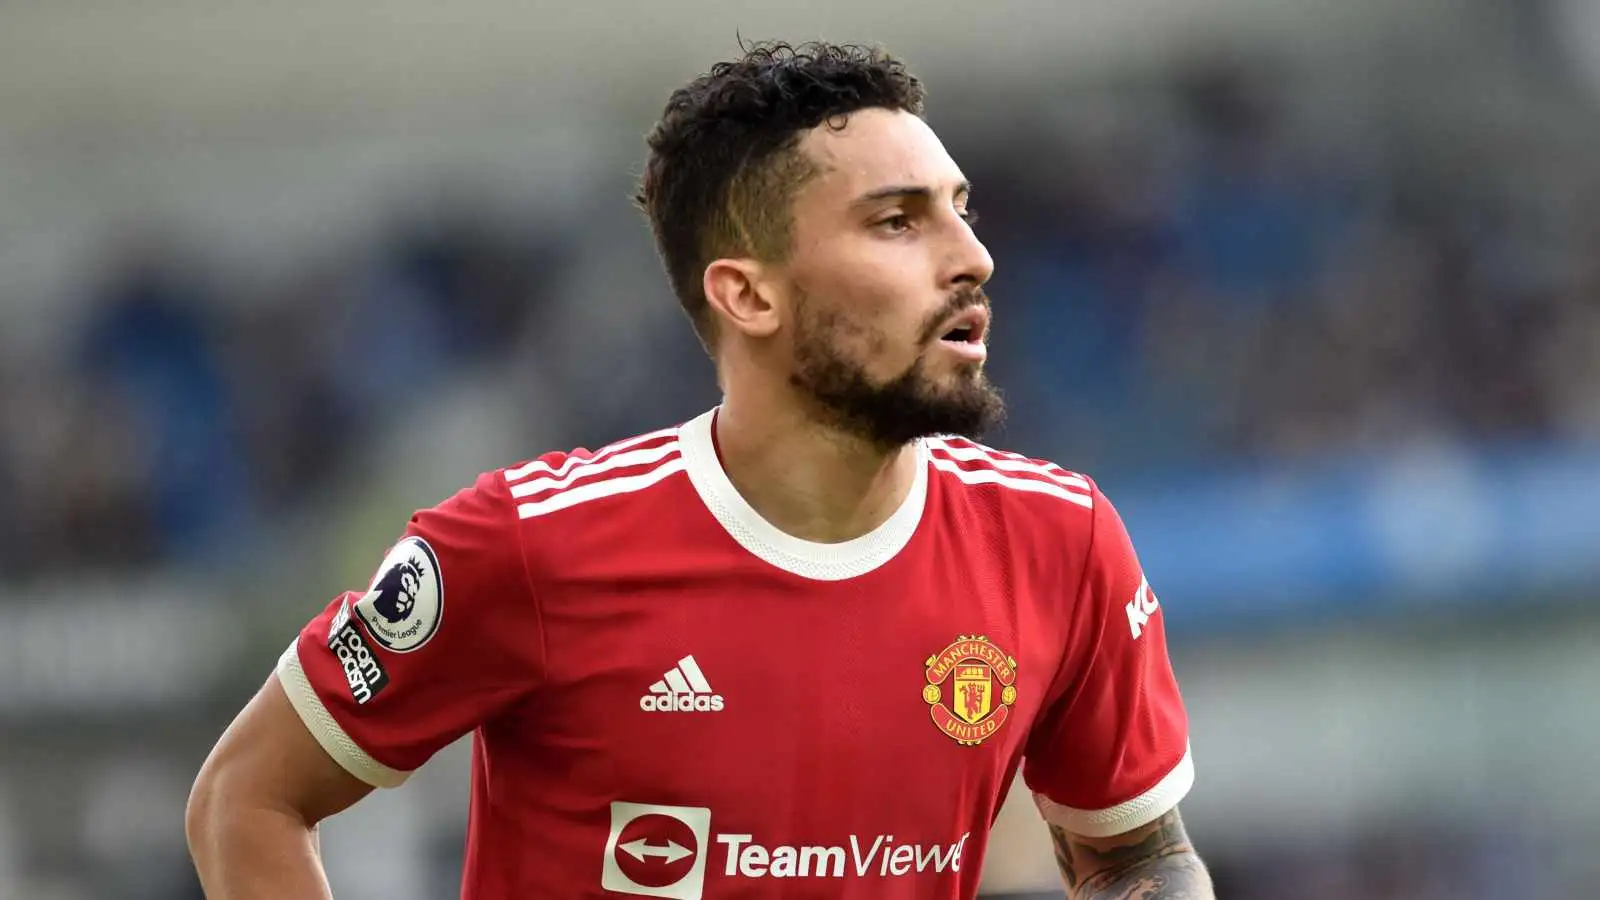 Alex Telles playing for Manchester United